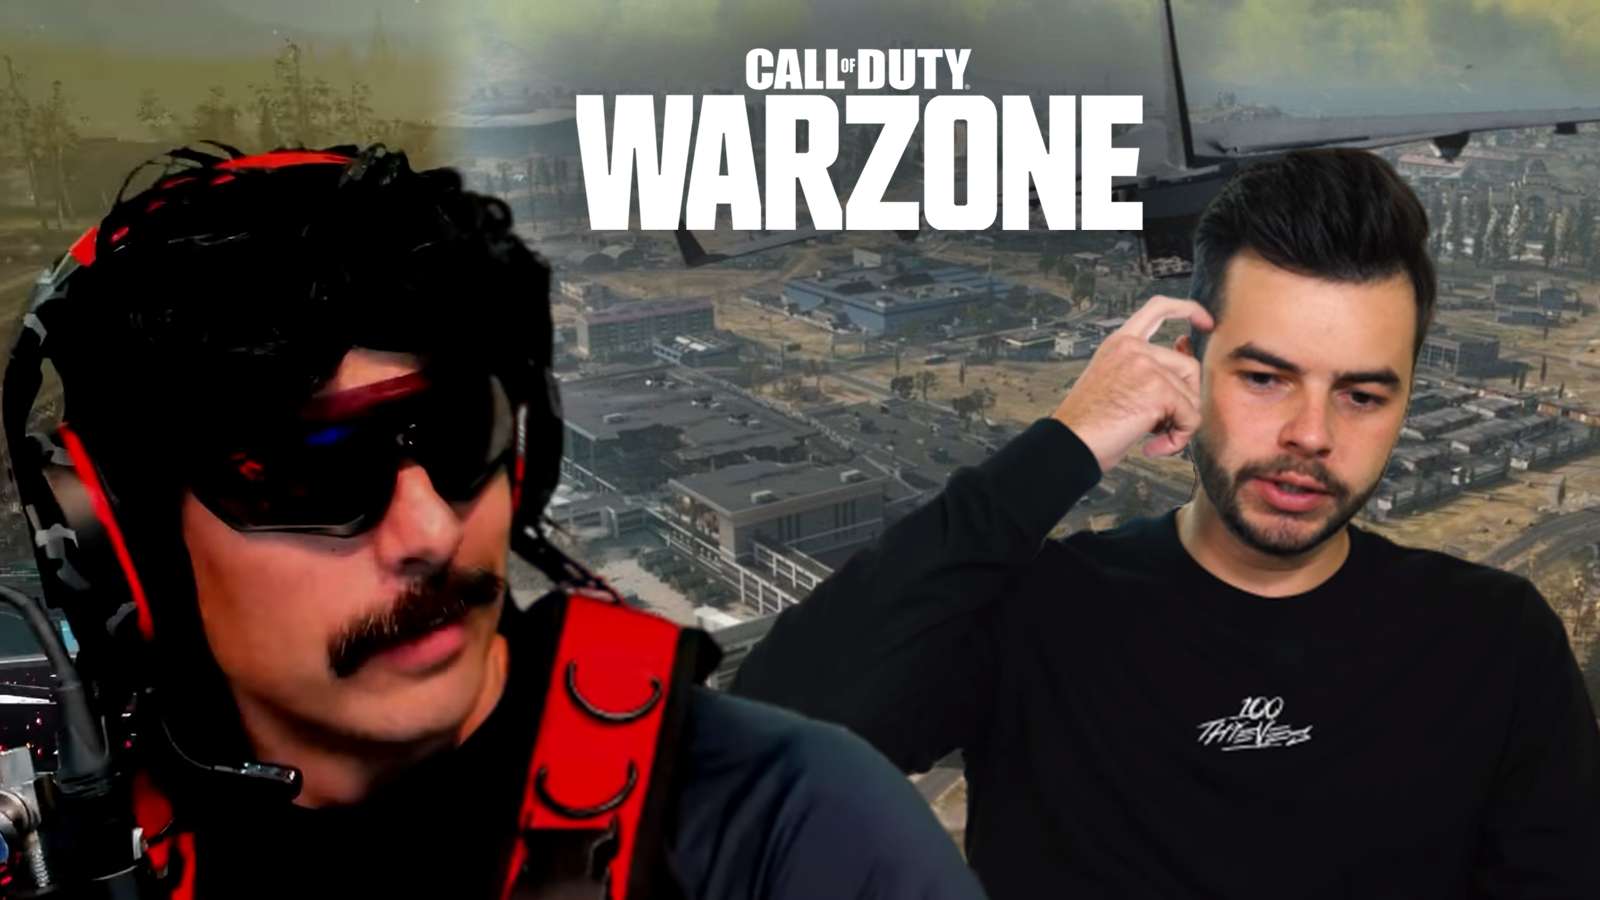 Dr Disrespect roasted Nadeshot for a hilarious Warzone play